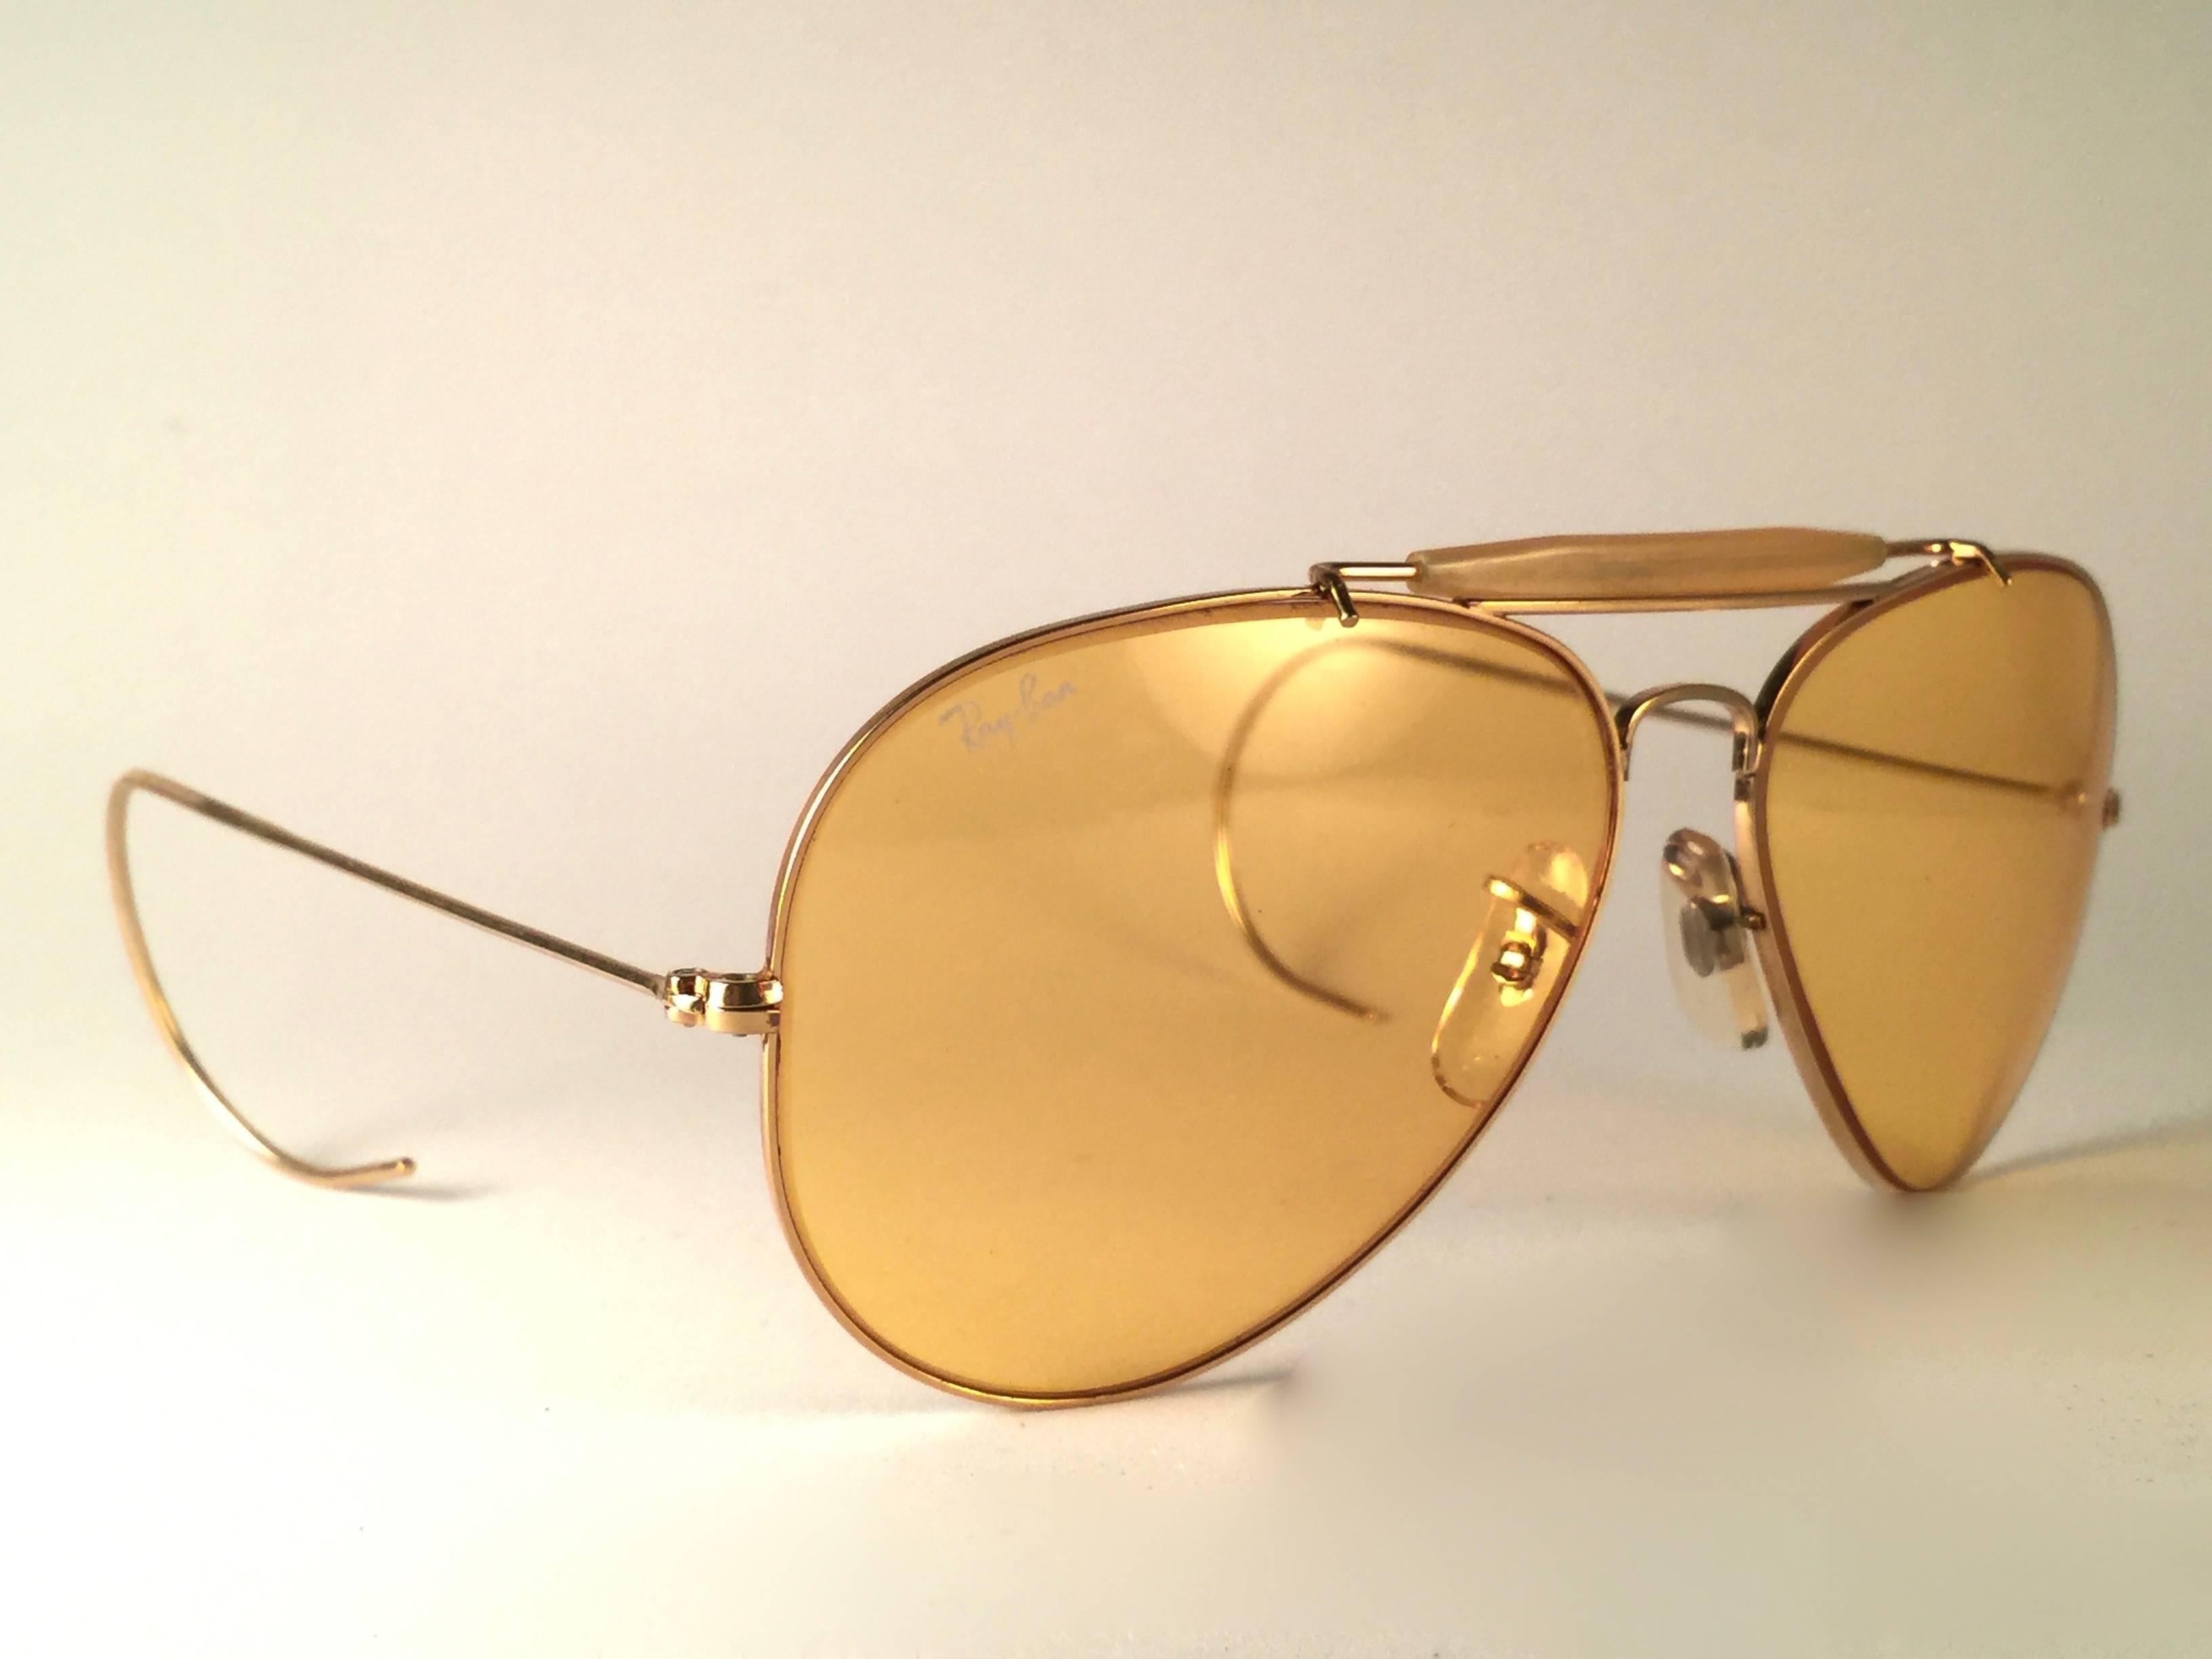 New Vintage Ray Ban Aviator Gold 58mm with Ambermatic lenses. B&L etched  in both lenses. Comes with its original Ray Ban B&L case. 

Please notice this pair may have minor sign of wear due to nearly 40 years of storage. A seldom piece in new, never